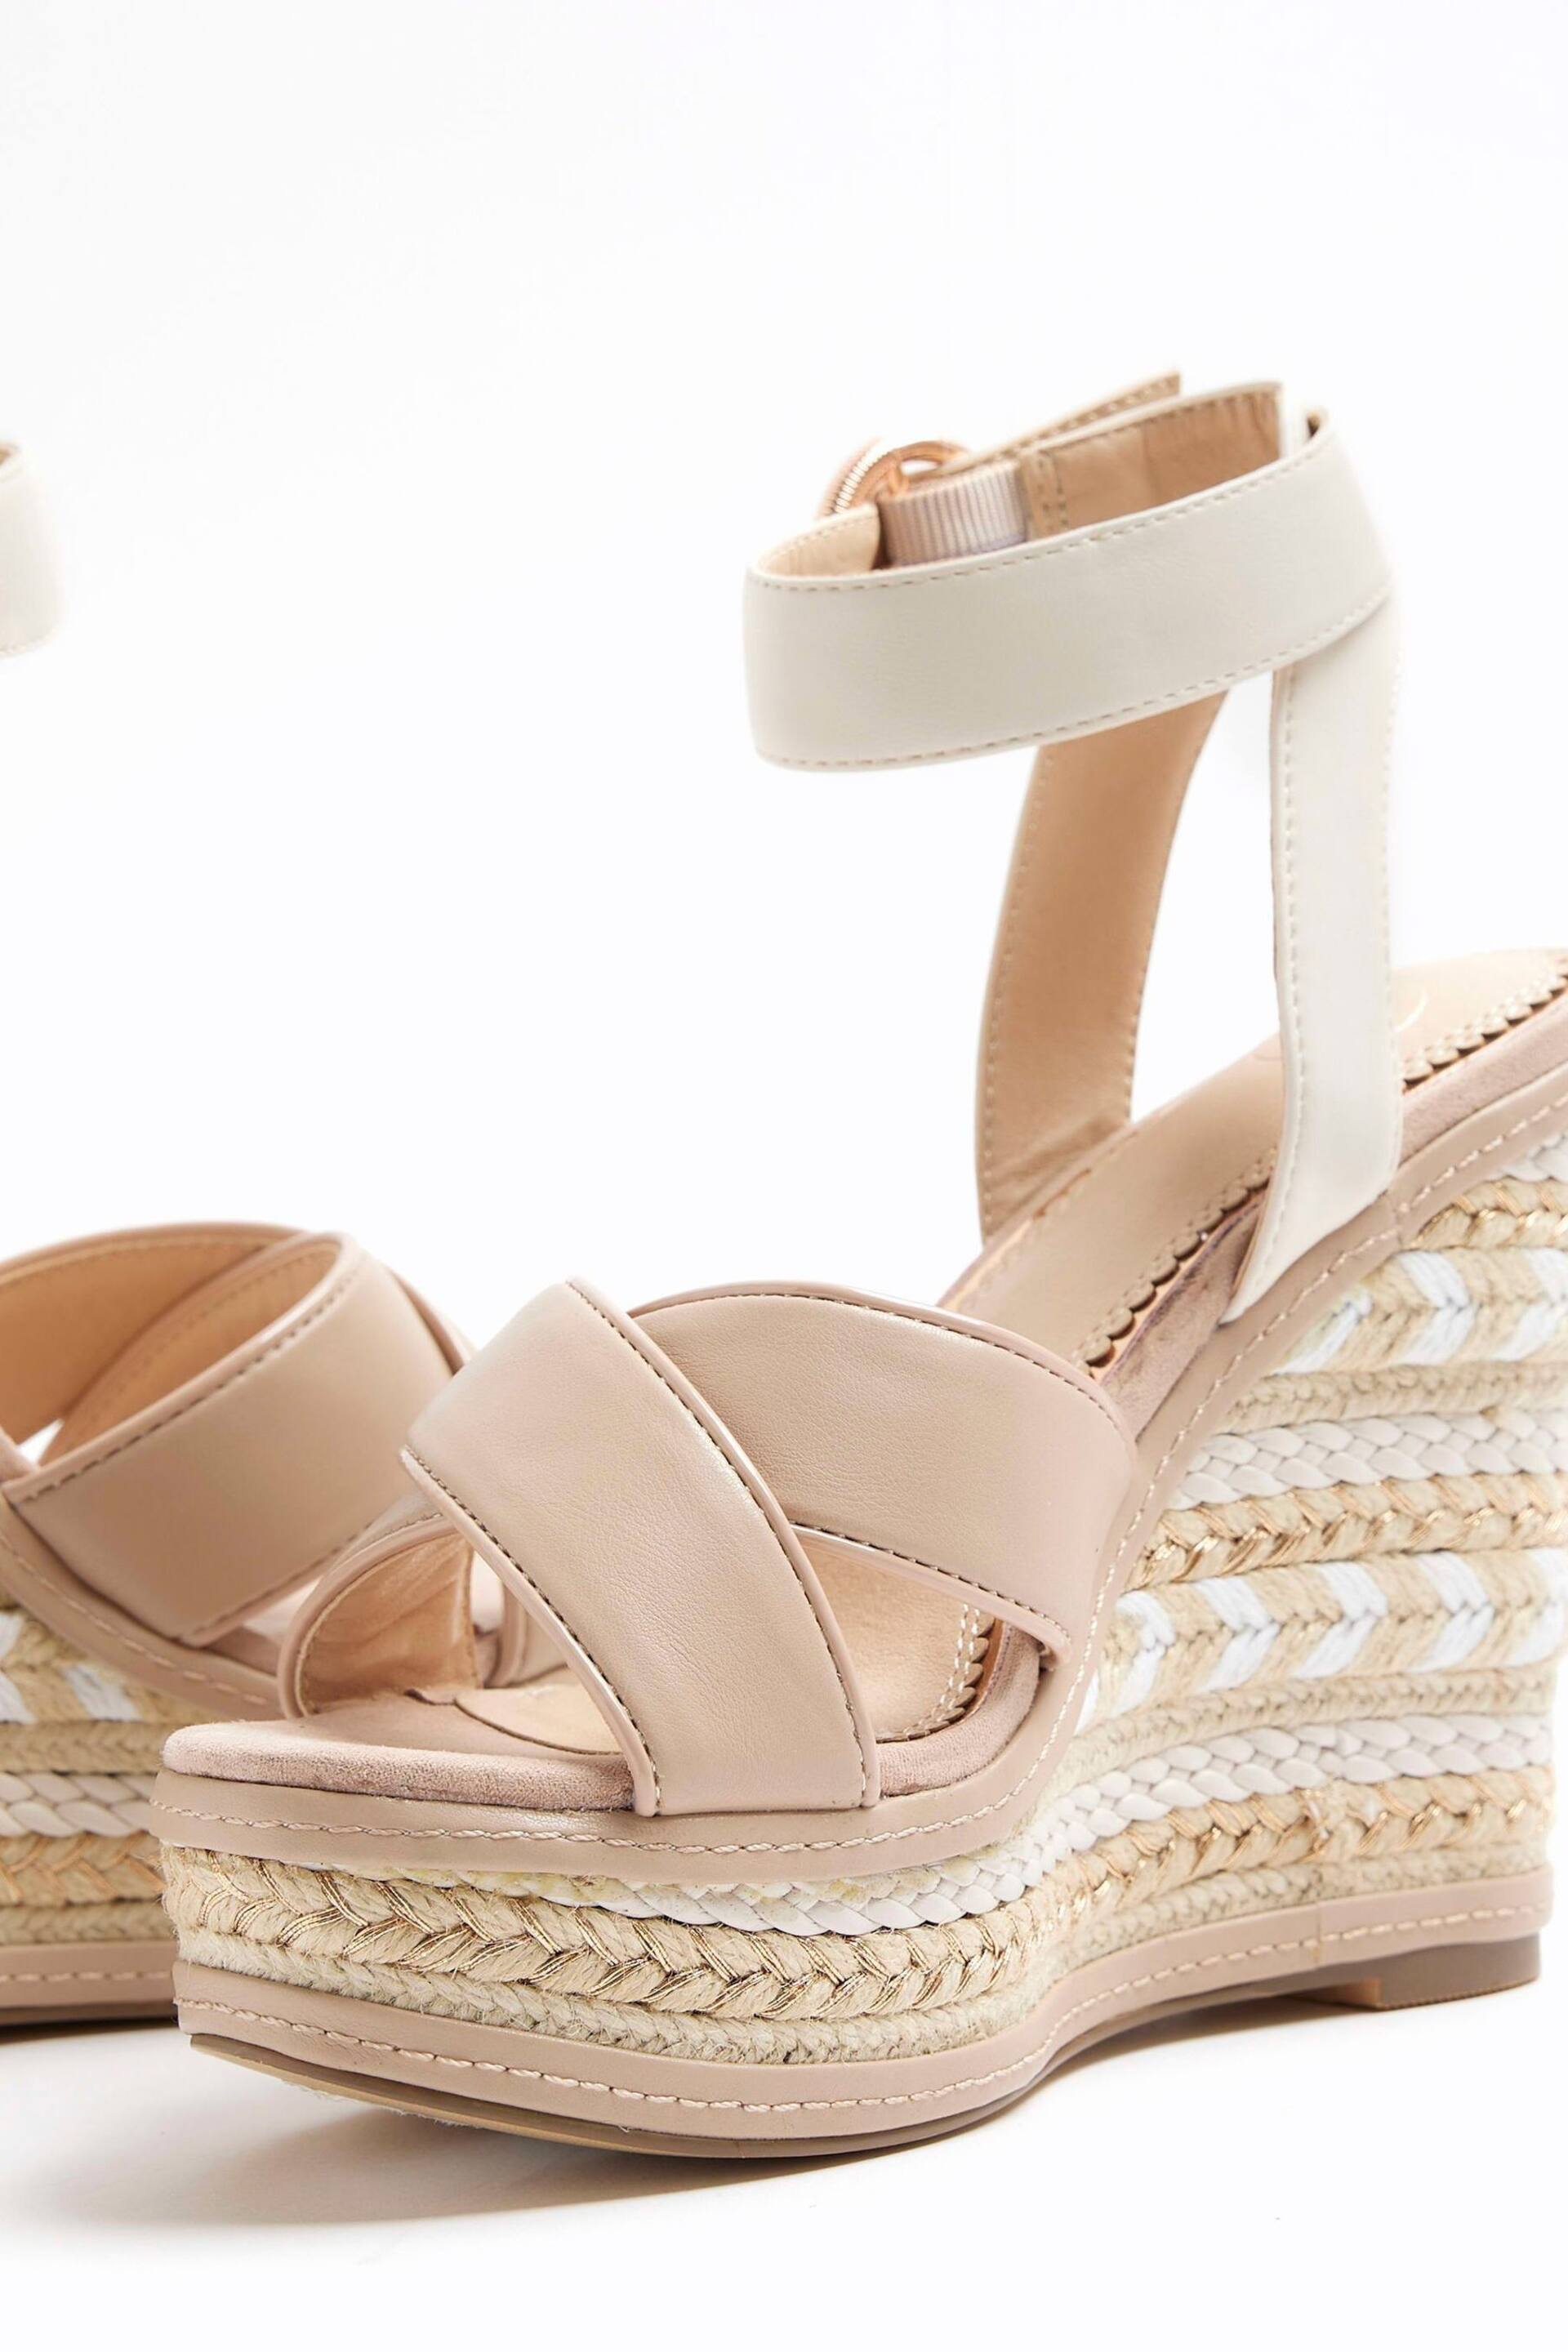 River Island White Espadrille Wedge Sandals - Image 4 of 4